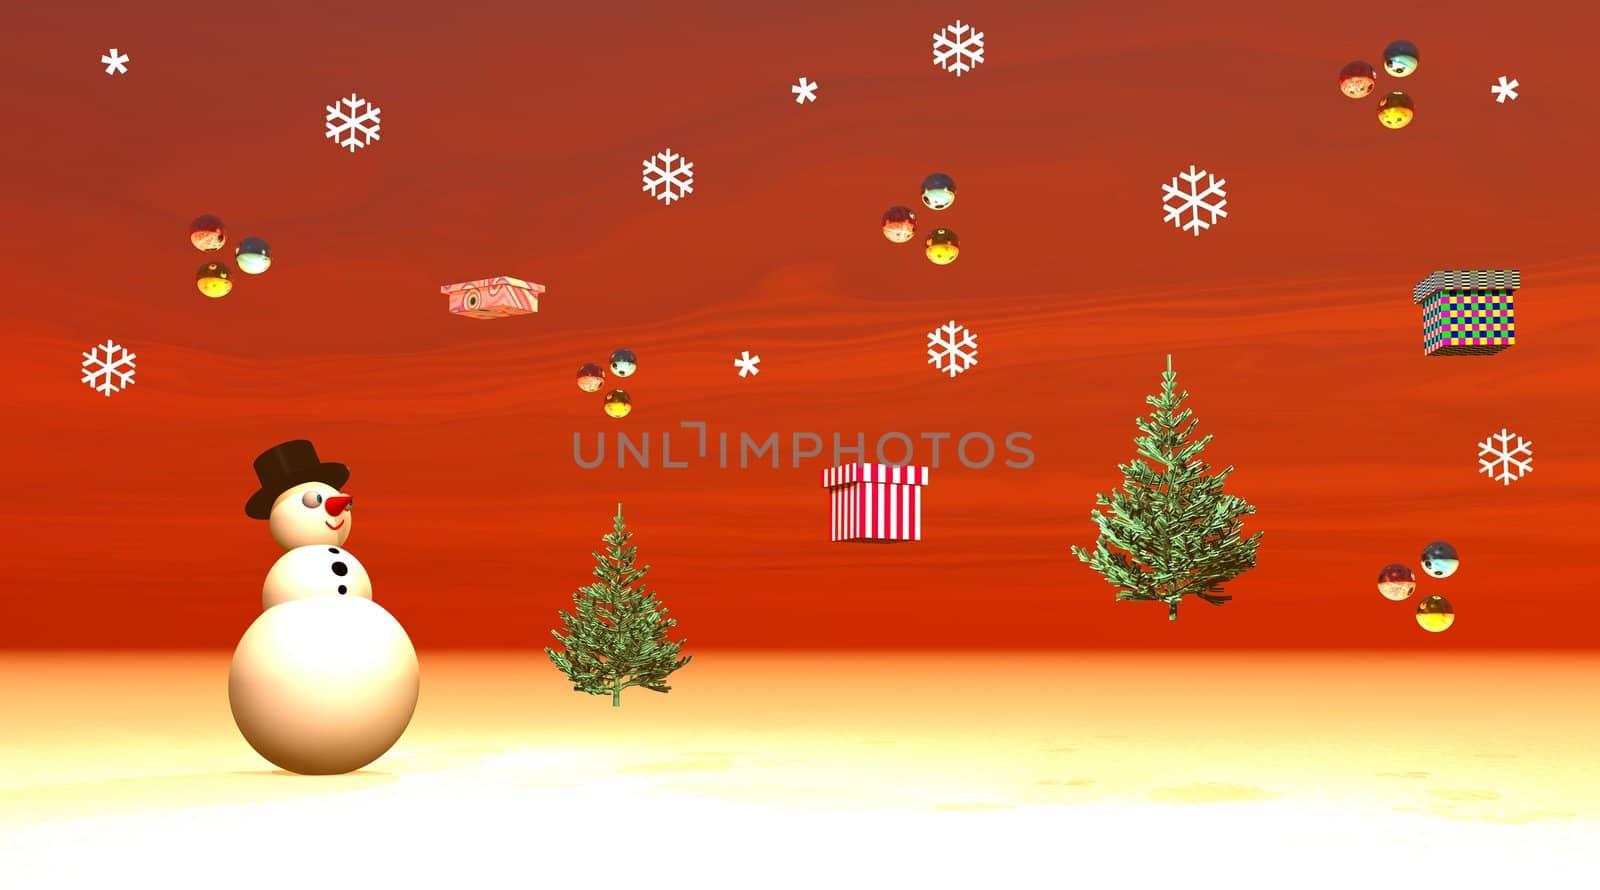 Snowman looking at gifts, balls and fir trees flying in the sky by Elenaphotos21